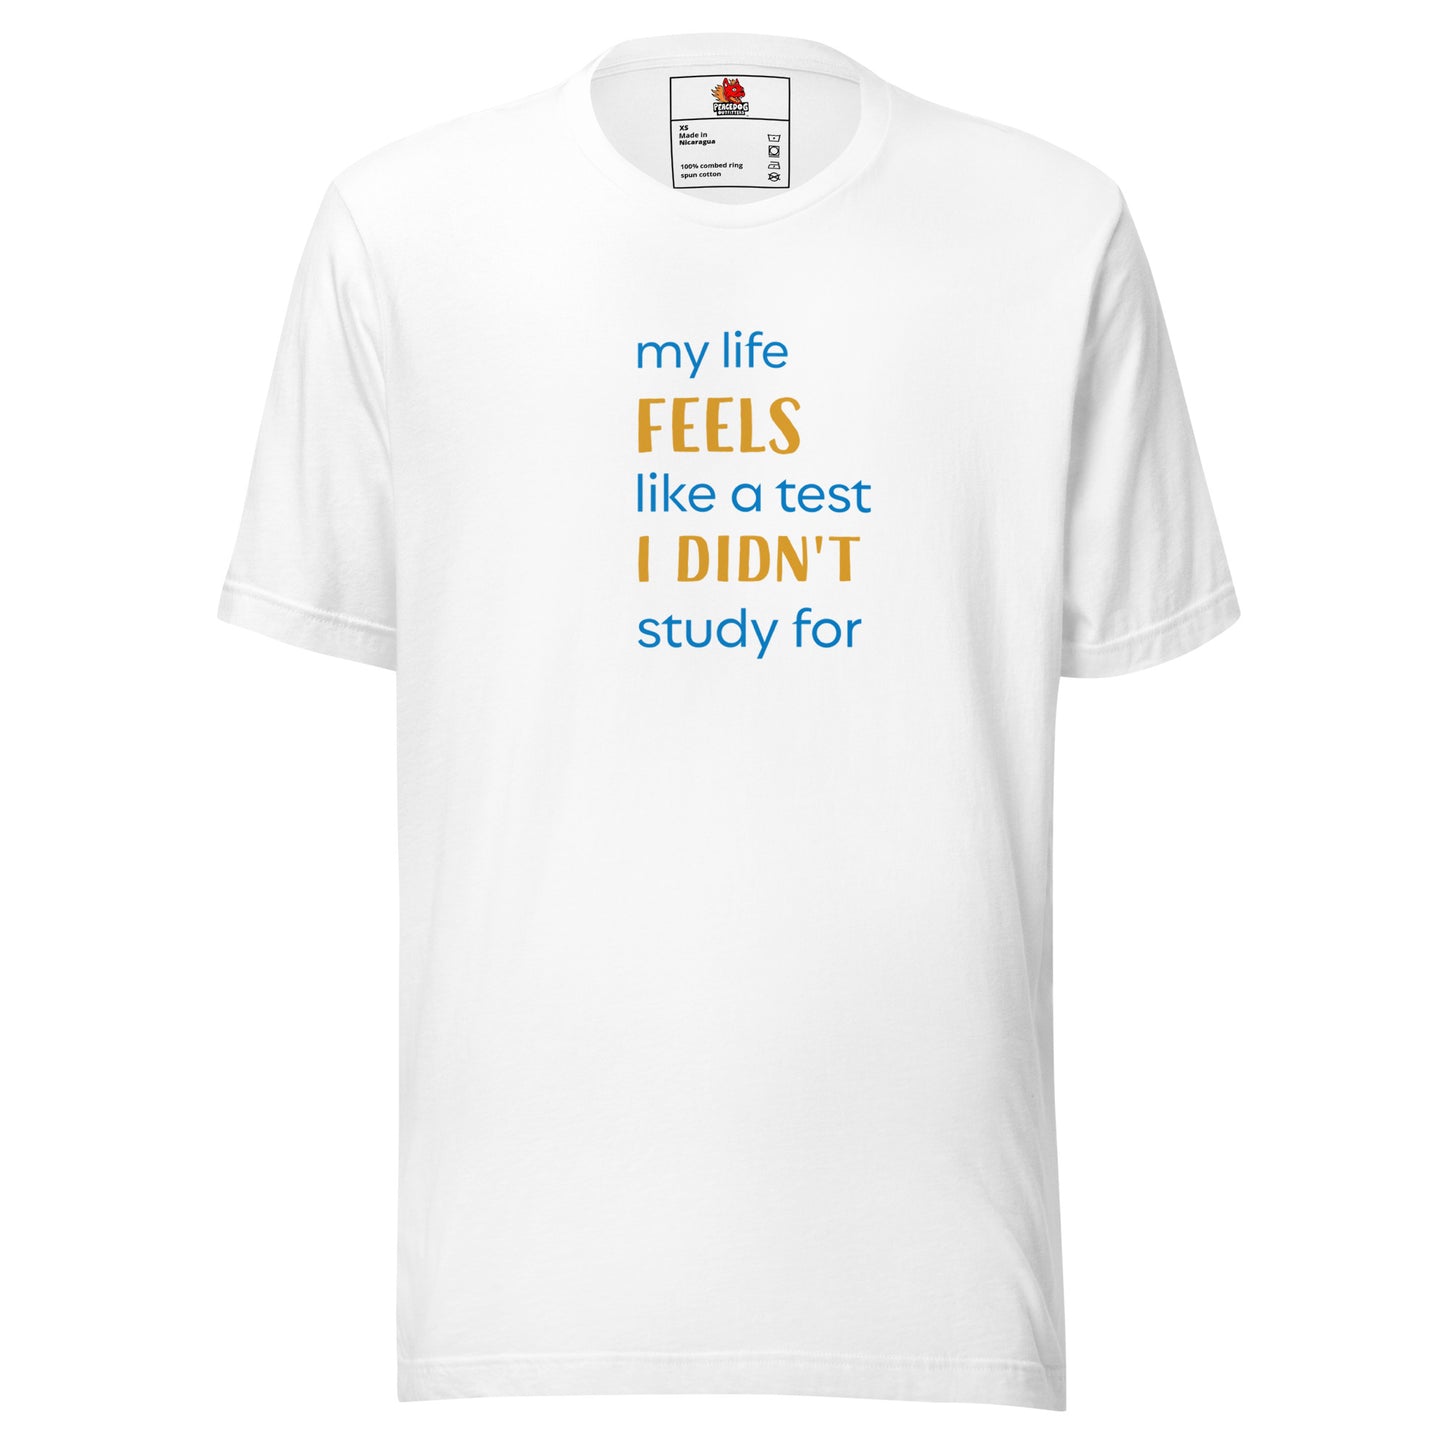 My Life Feels Like a Test I Didn't Study For T-shirt